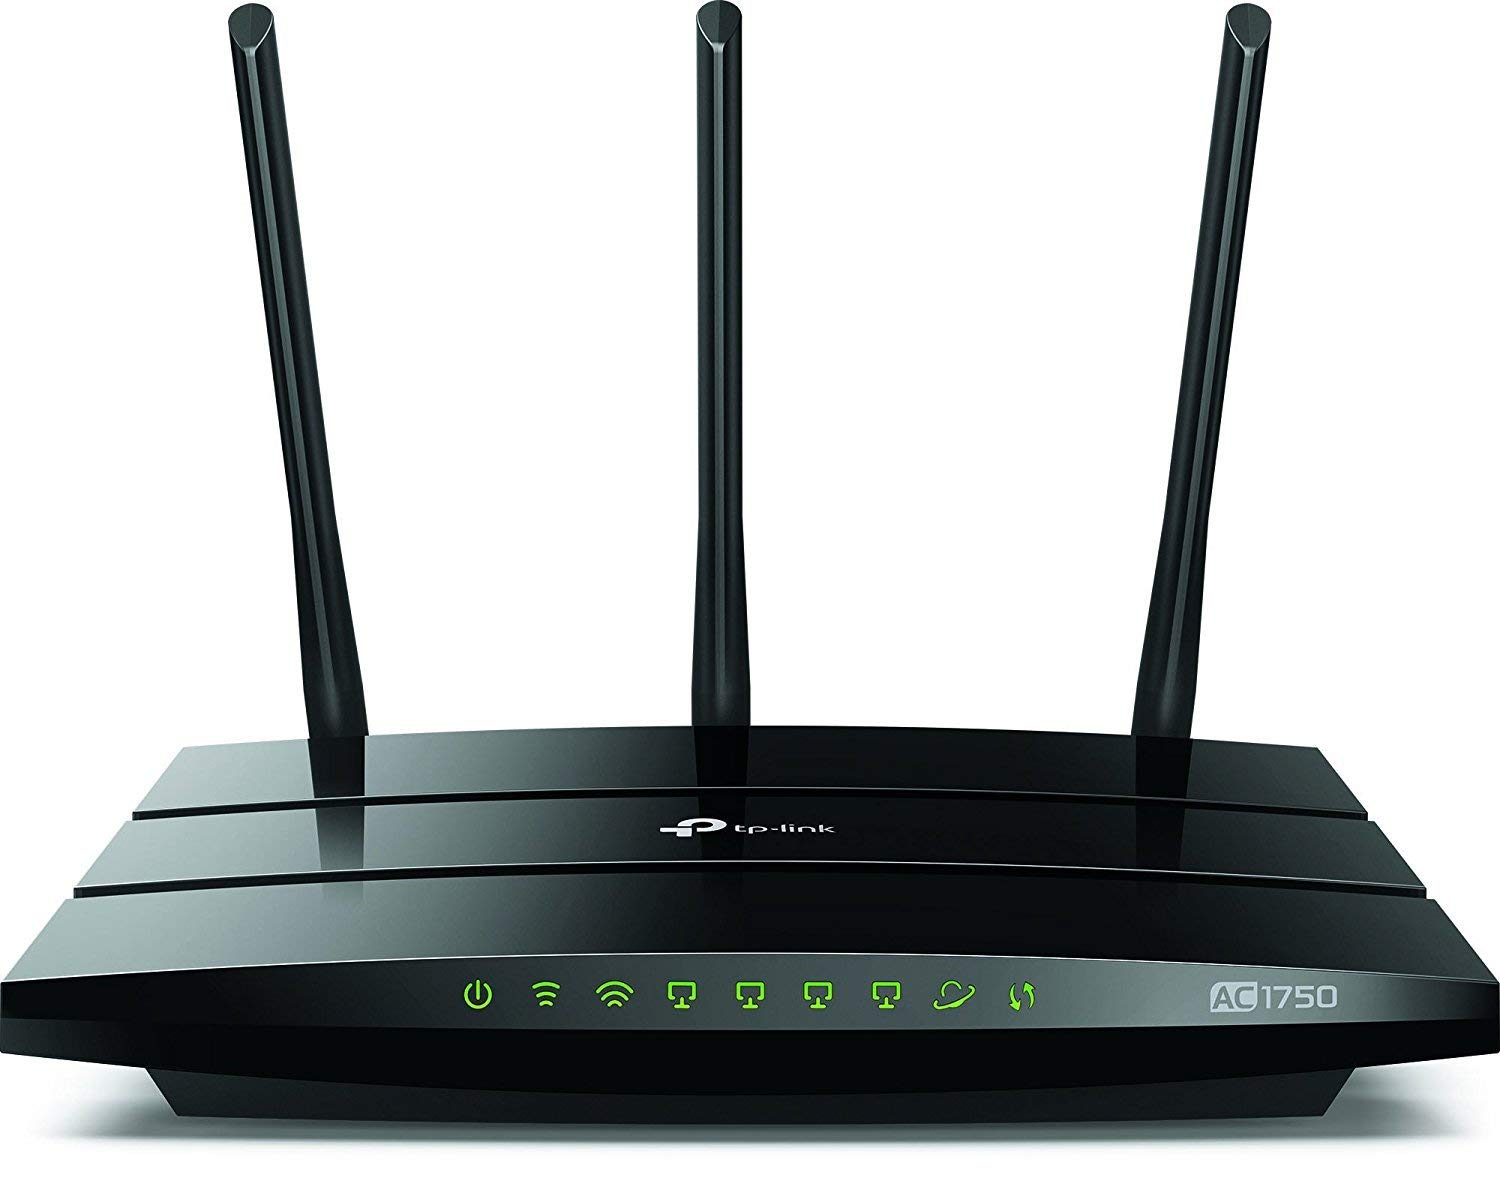 TP-Link AC1750 Smart WiFi Router-5GHz Dual Band Gigabit Wireless Internet Routers for Home, Parental Control&QoS(Archer A7) (Certified Refurbished)